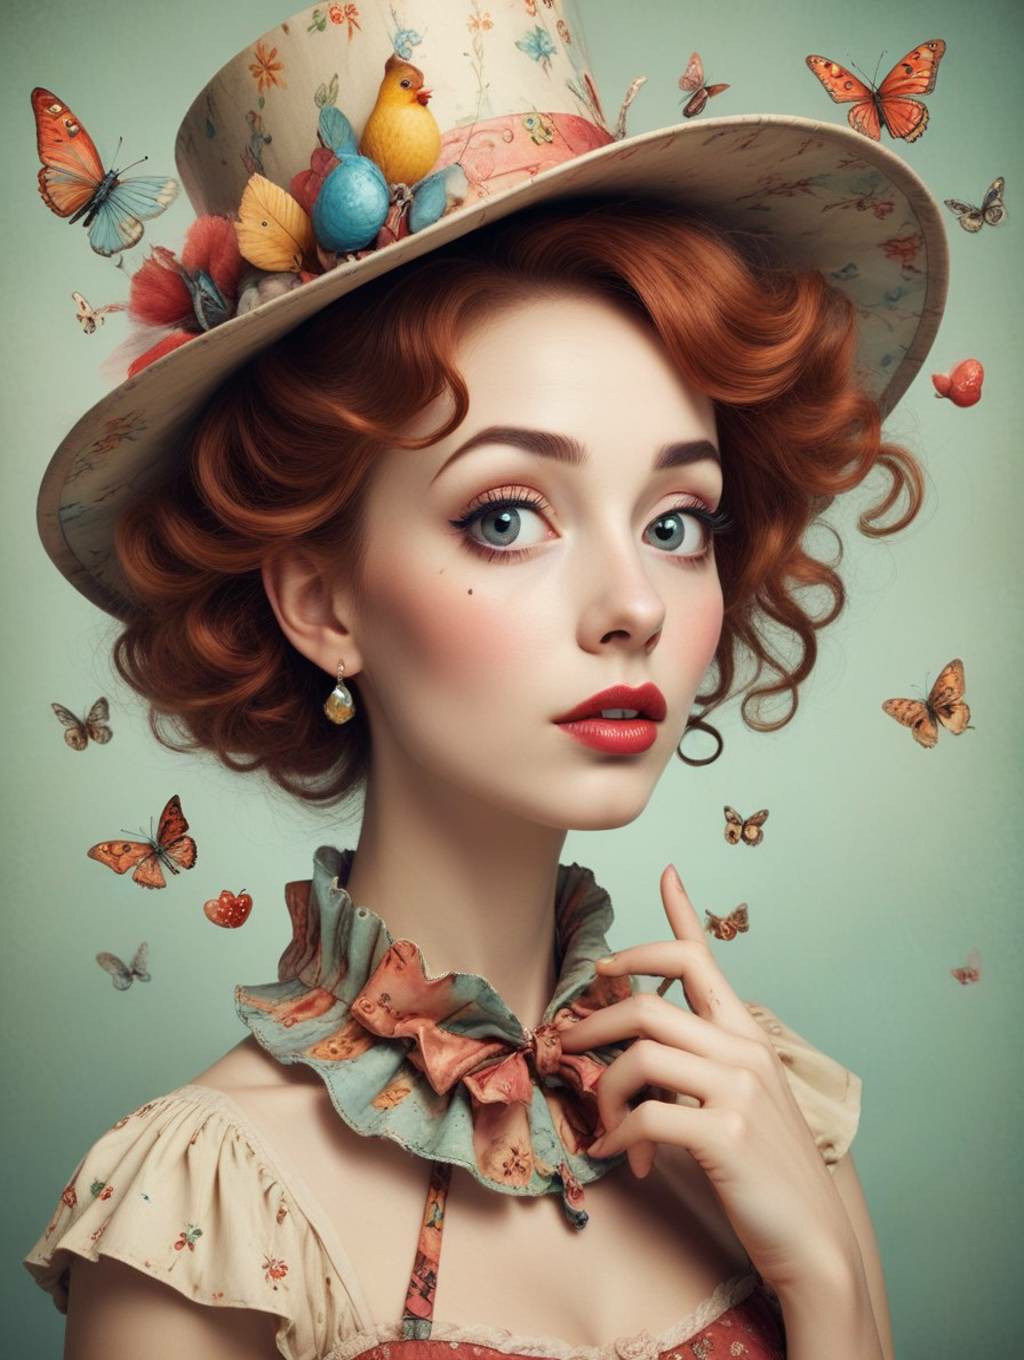 Whimsical & Quirky Women: Art Frames & Portrait Photography-Theme:3